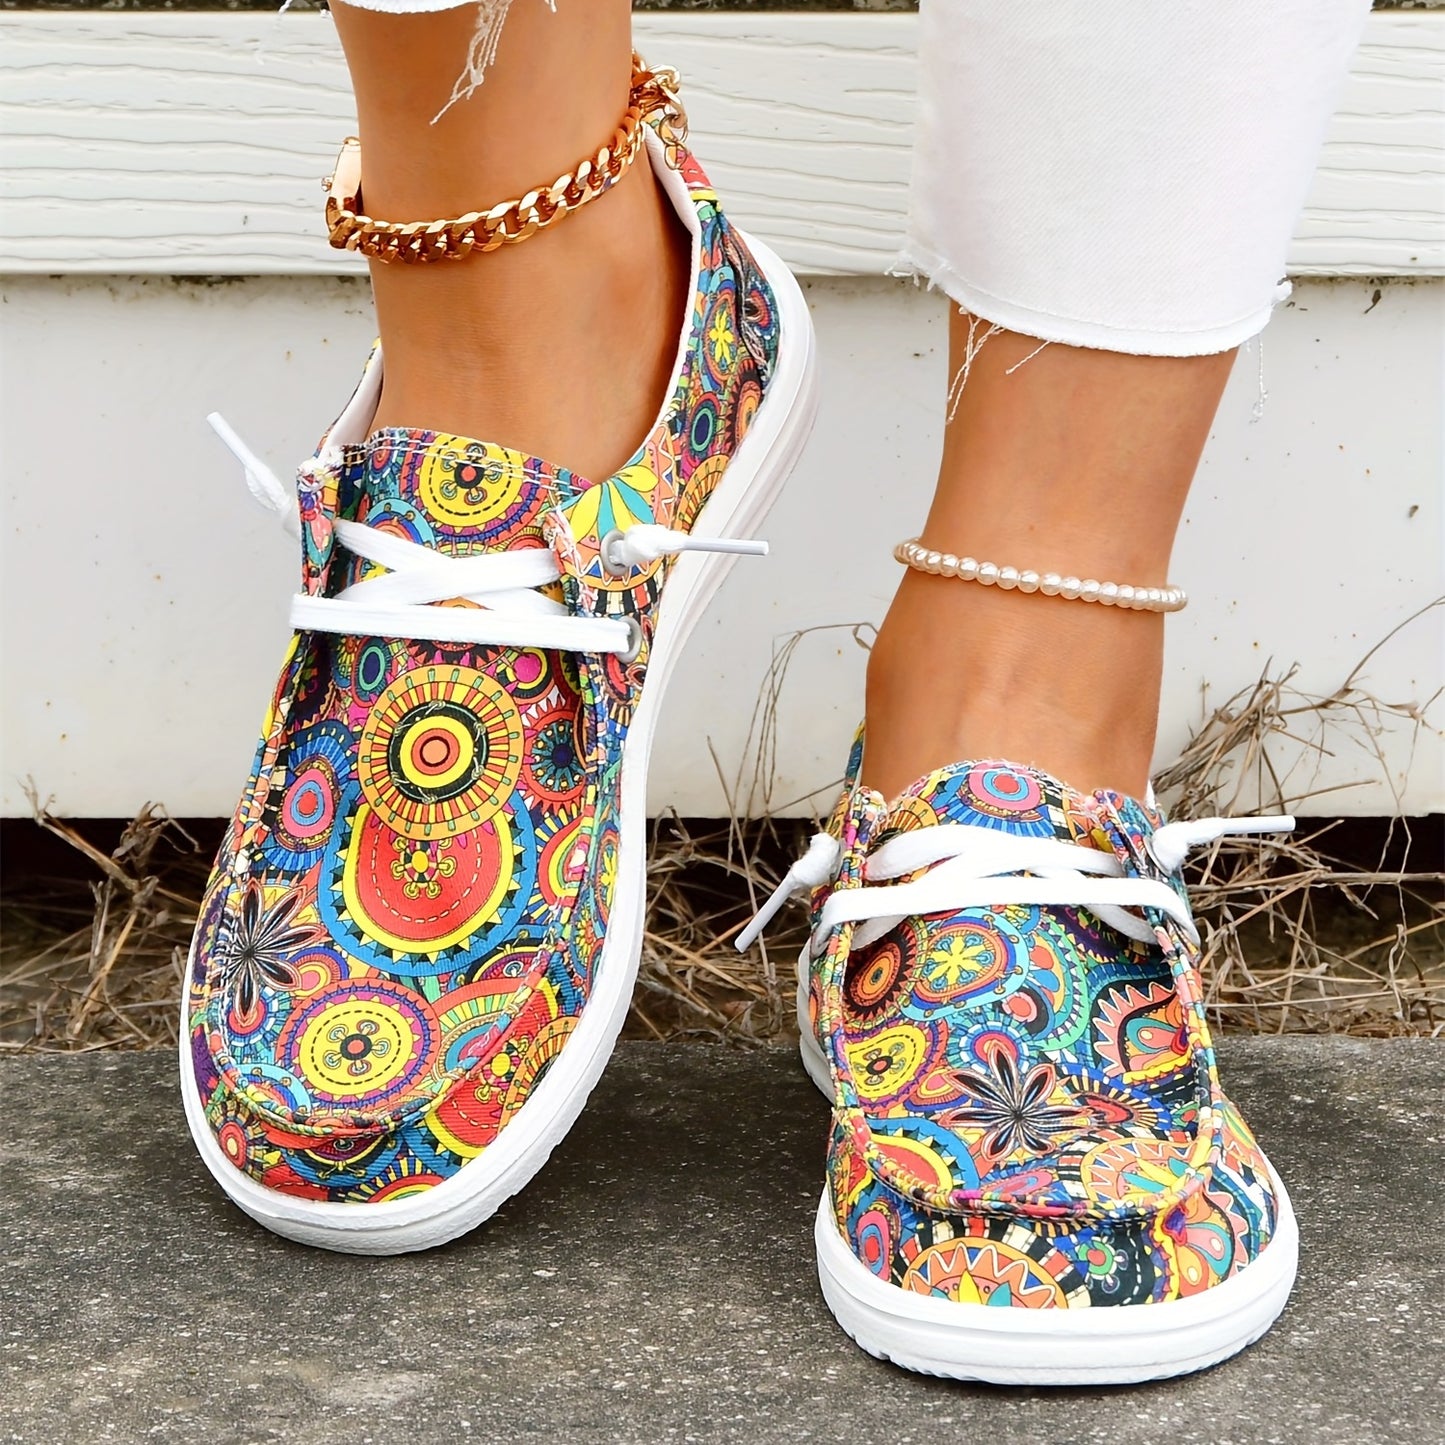 Women's Colorful Floral Printed Flats, Fashion Low Top Canvas Shoes, Casual Walking Sneakers